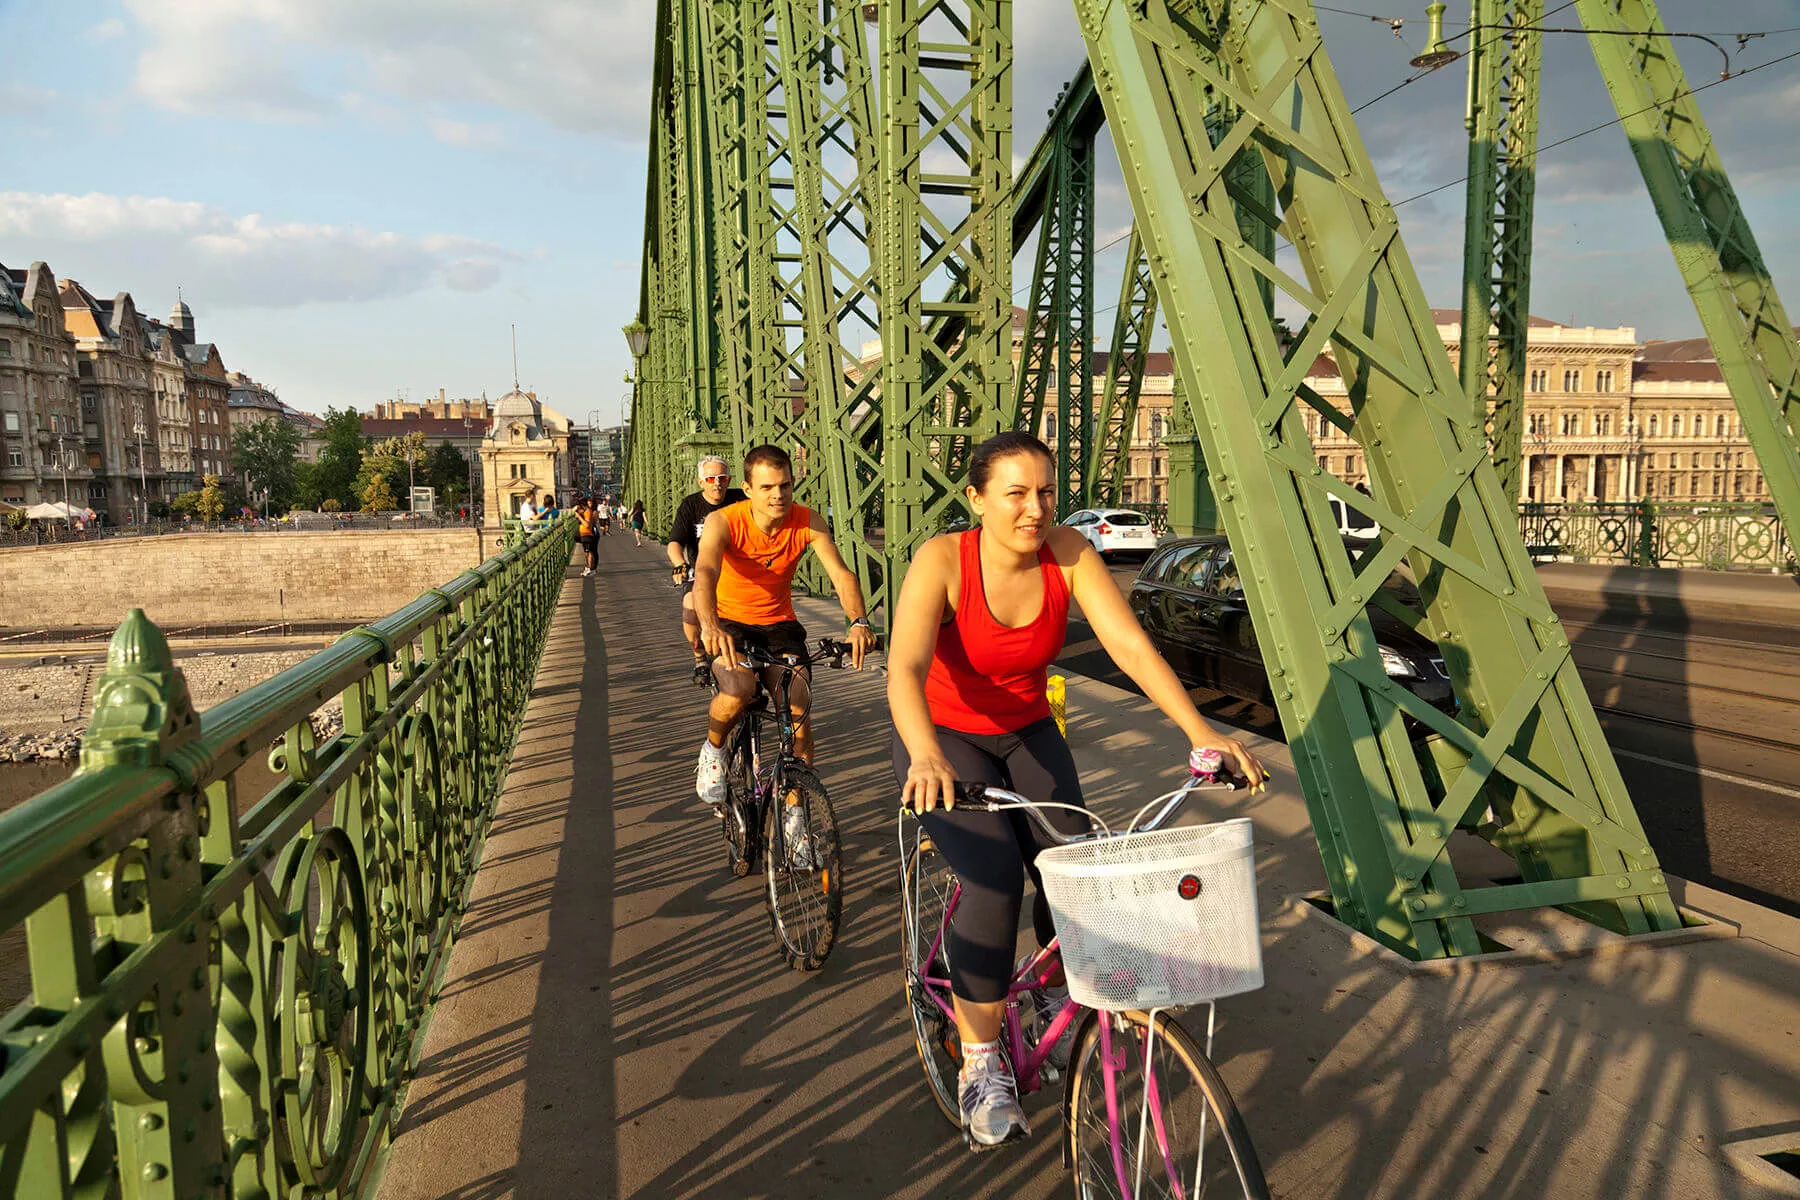 Biking is an energizing way to take in the sights of Budapest